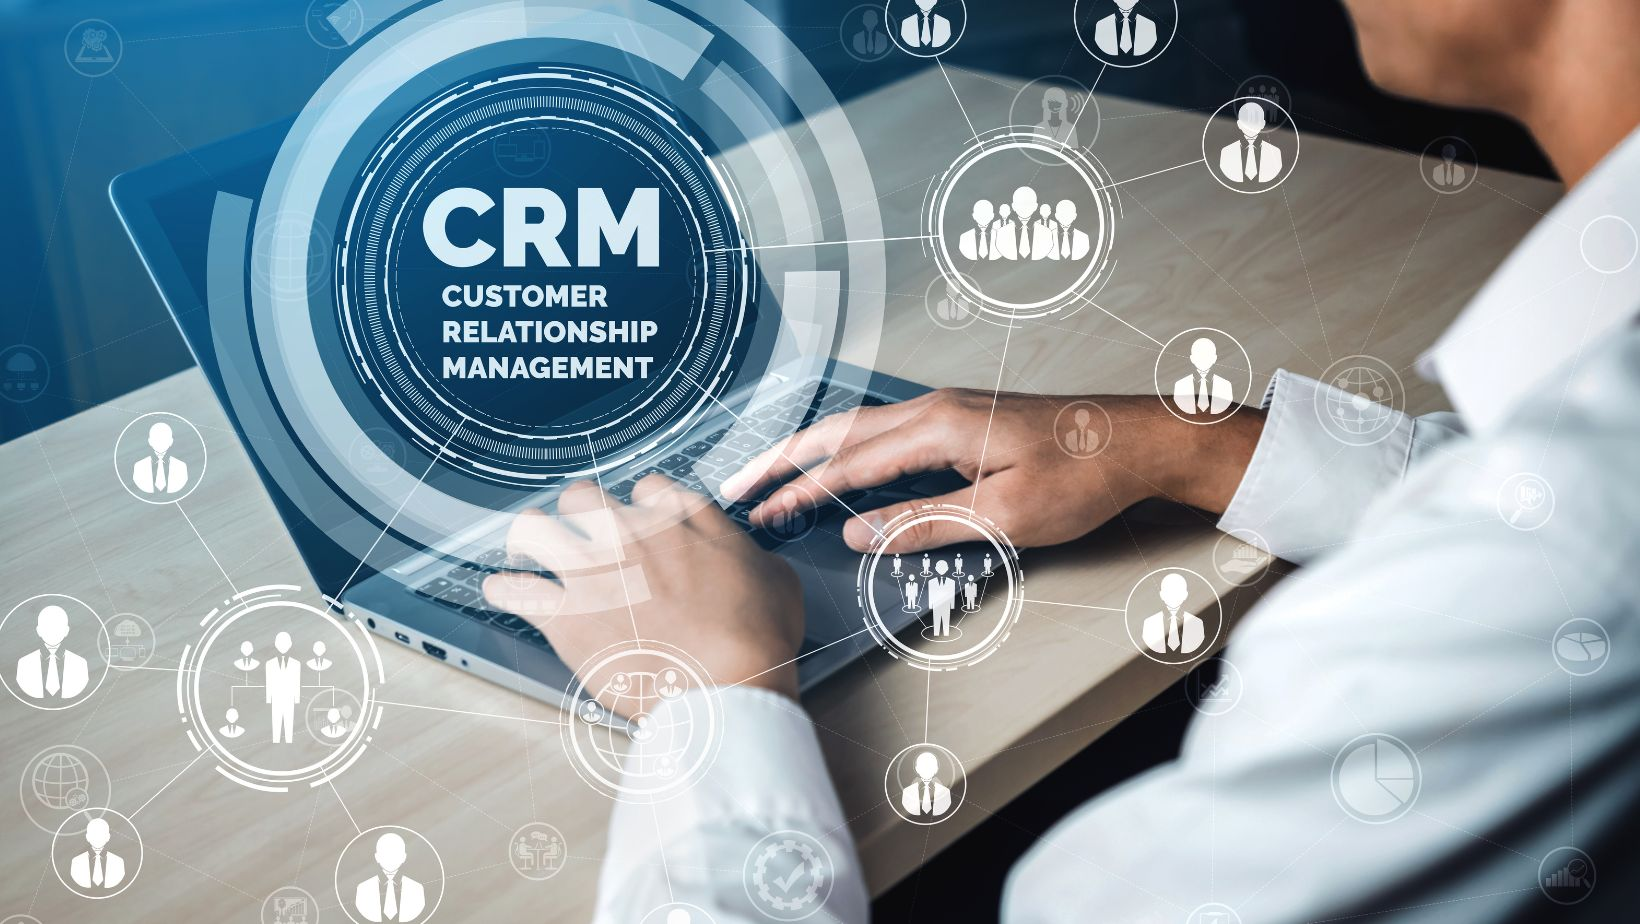 Key features of an insurance CRM software